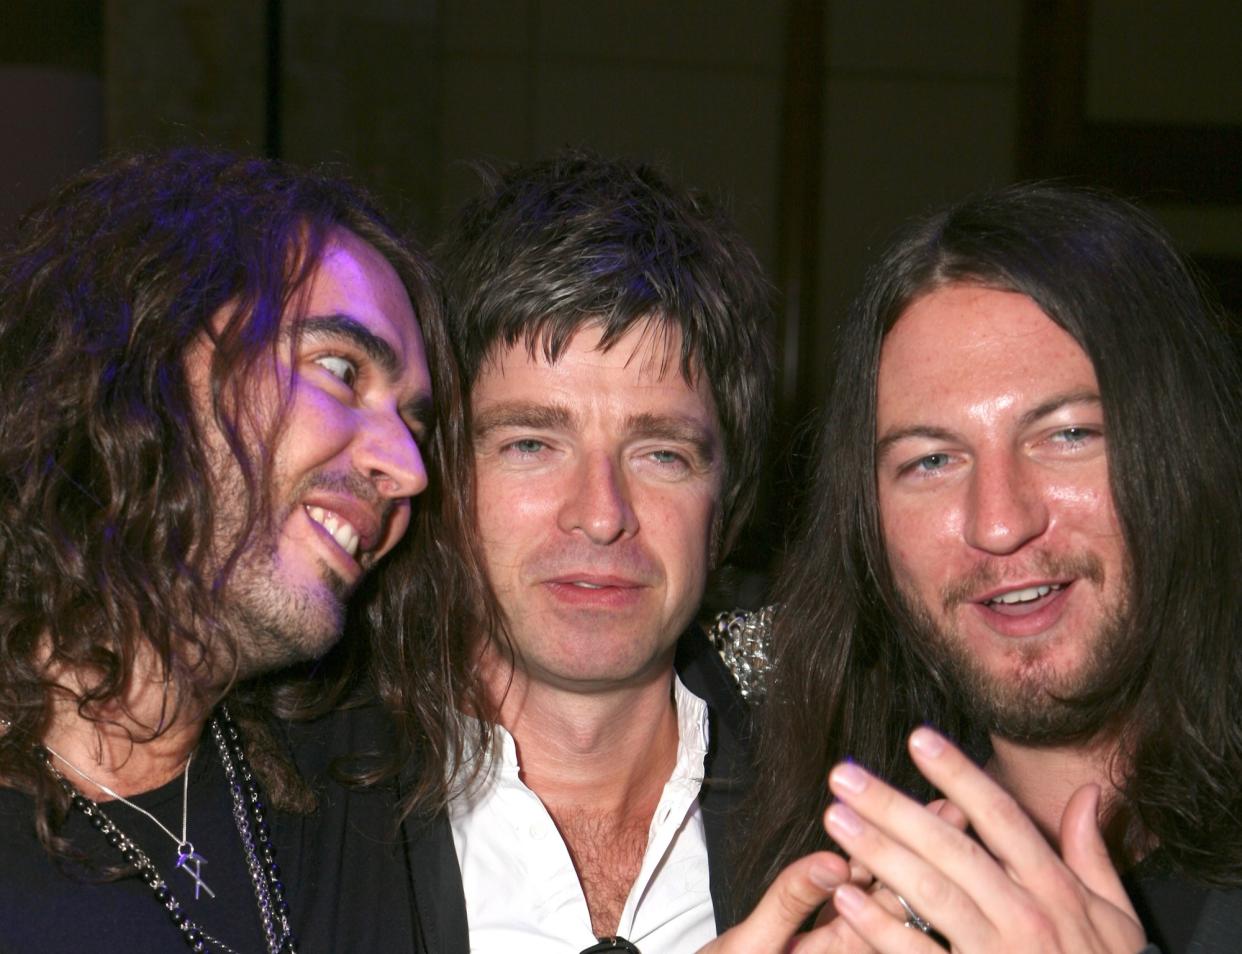 Russell Brand, left, and Matt Morgan, right, pictured with Noel Gallagher in 2008. (Getty Images)